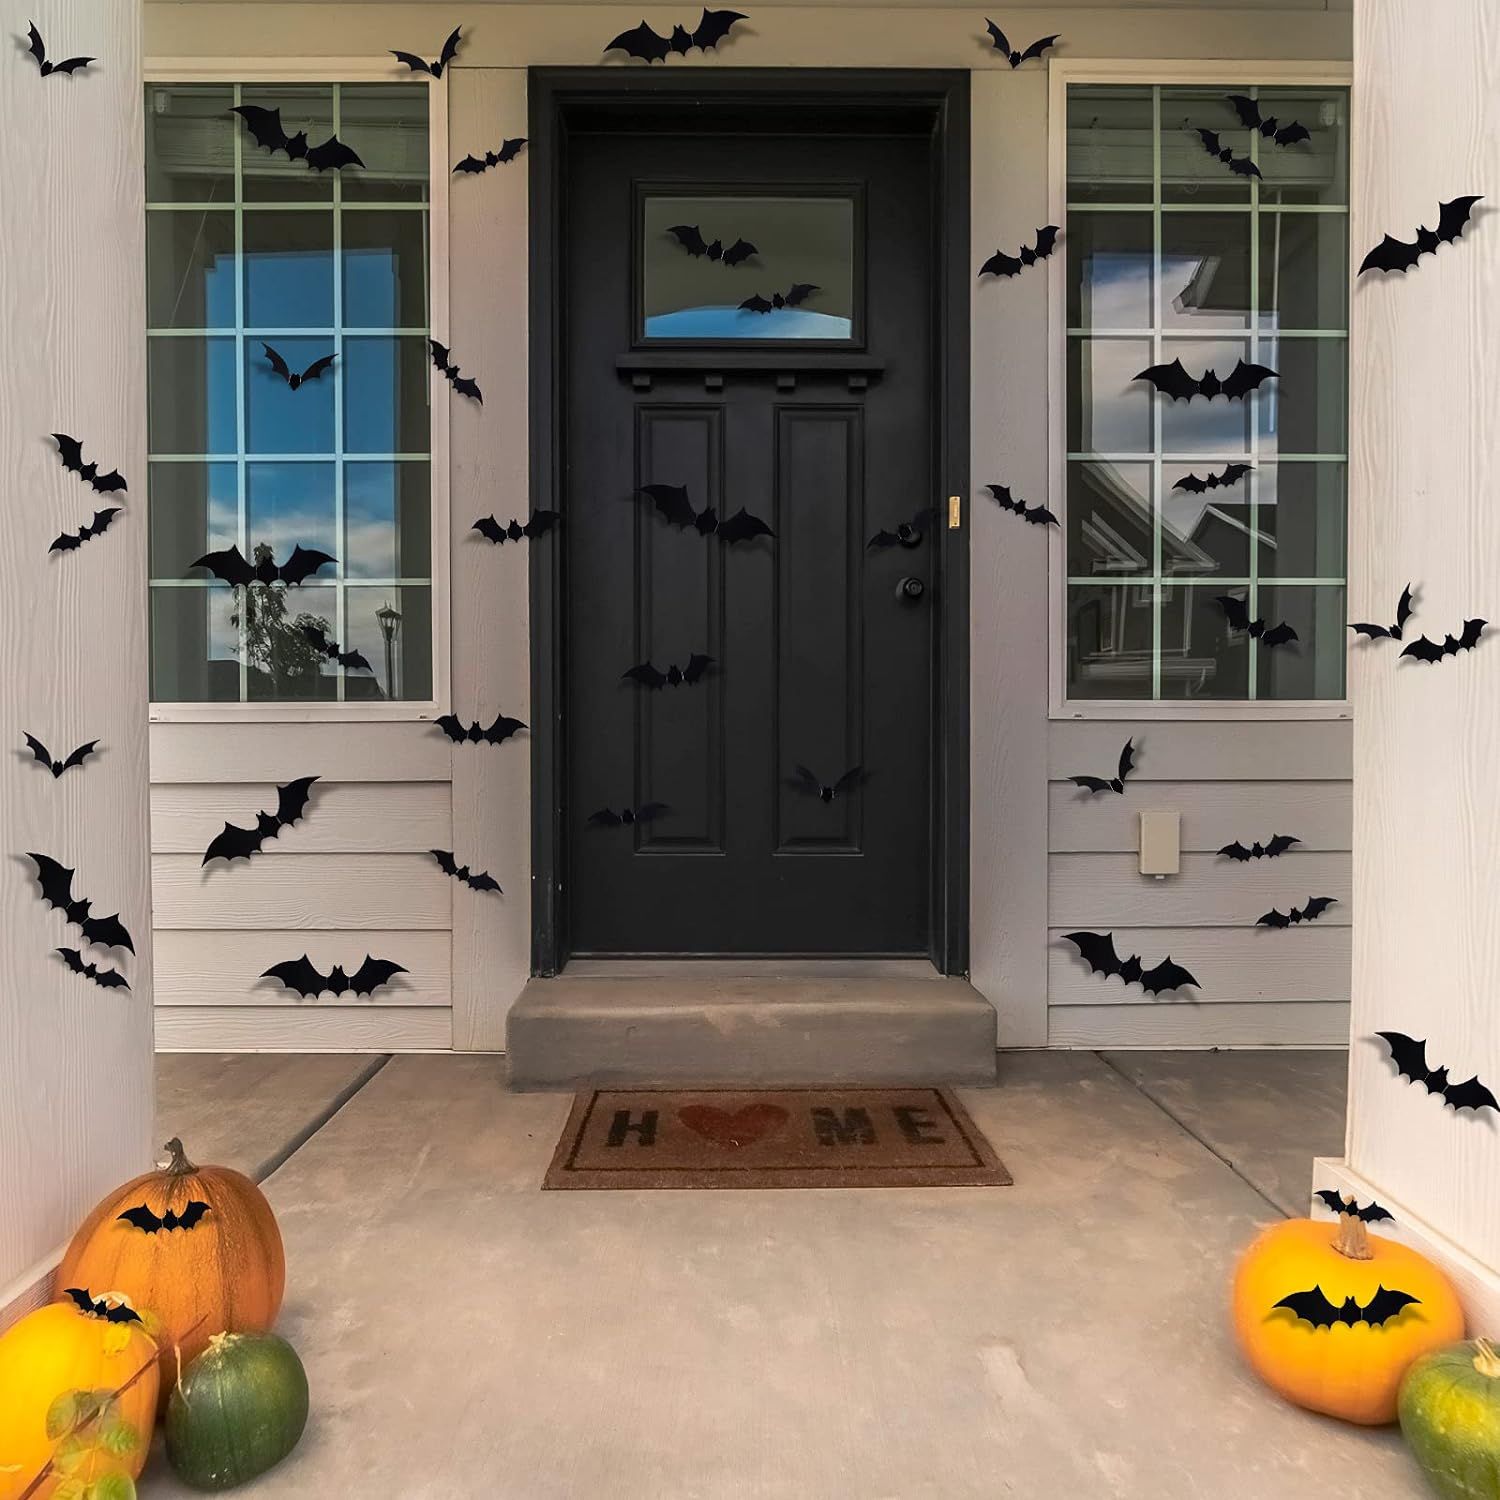 3D Bats Stickers, PVC Scary Wall Bat Decals for Home Window Room Decor Halloween Party Supplies, ... | Amazon (US)